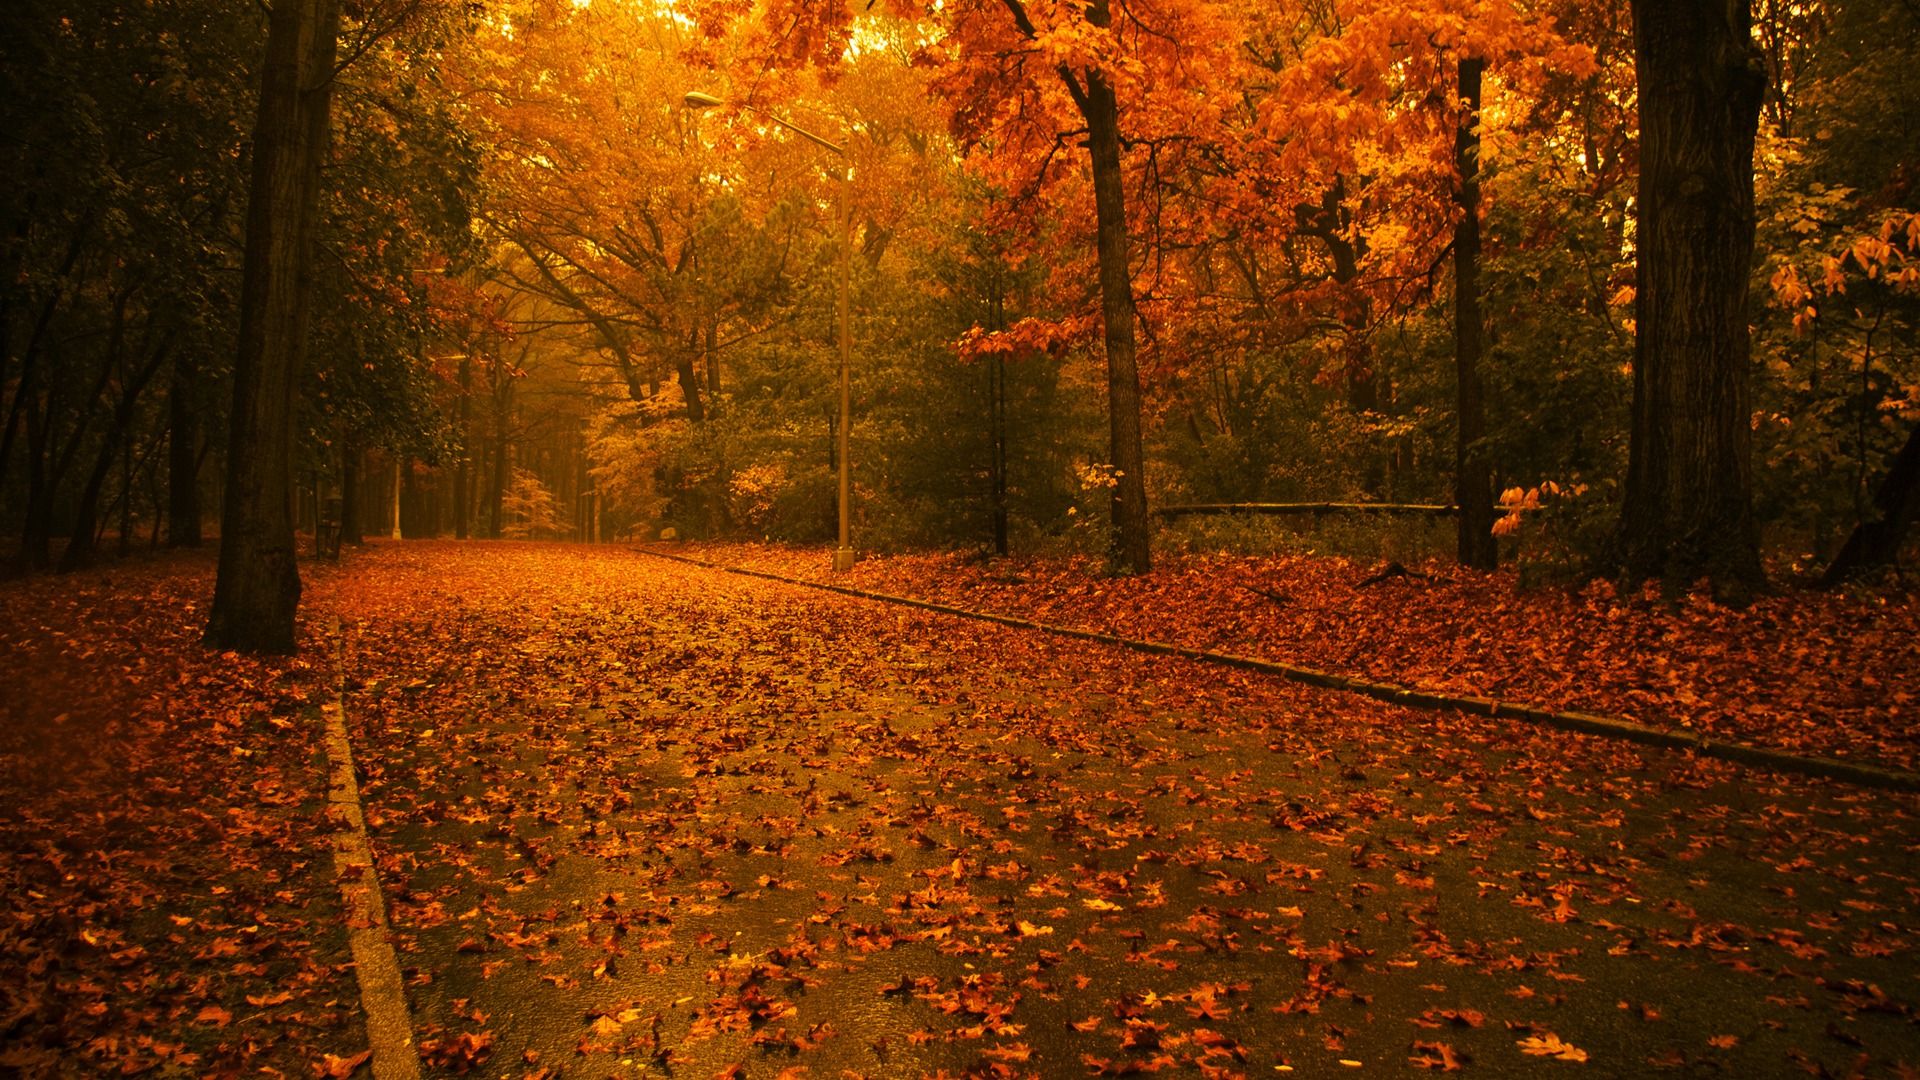 Autumn road Wallpaper Autumn Nature Wallpaper in jpg format for free download